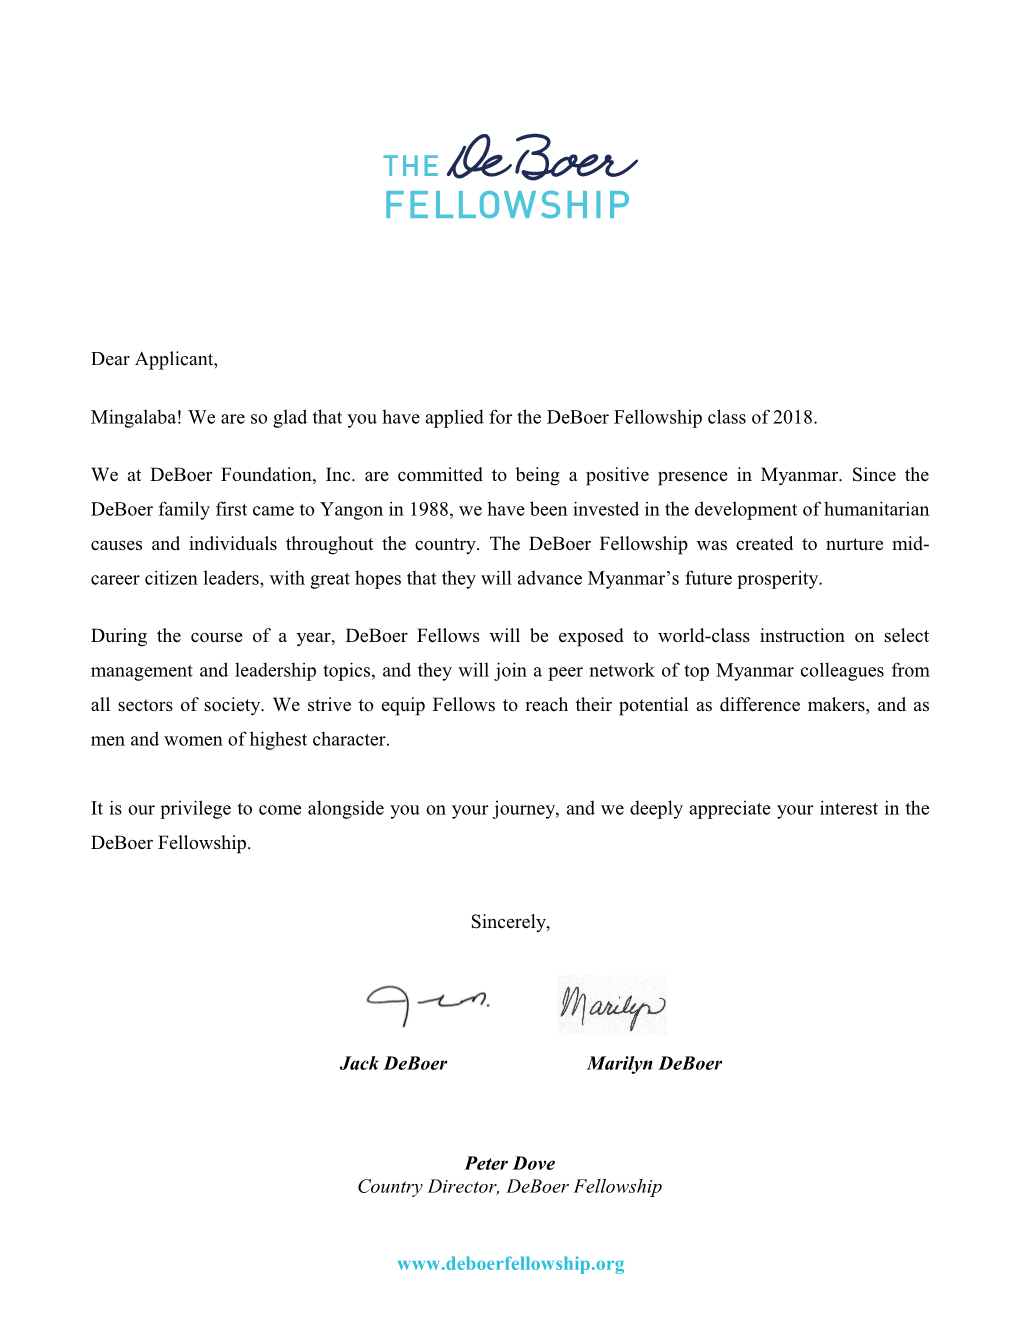 Mingalaba! We Are So Glad That You Have Applied for the Deboer Fellowship Class of 2018